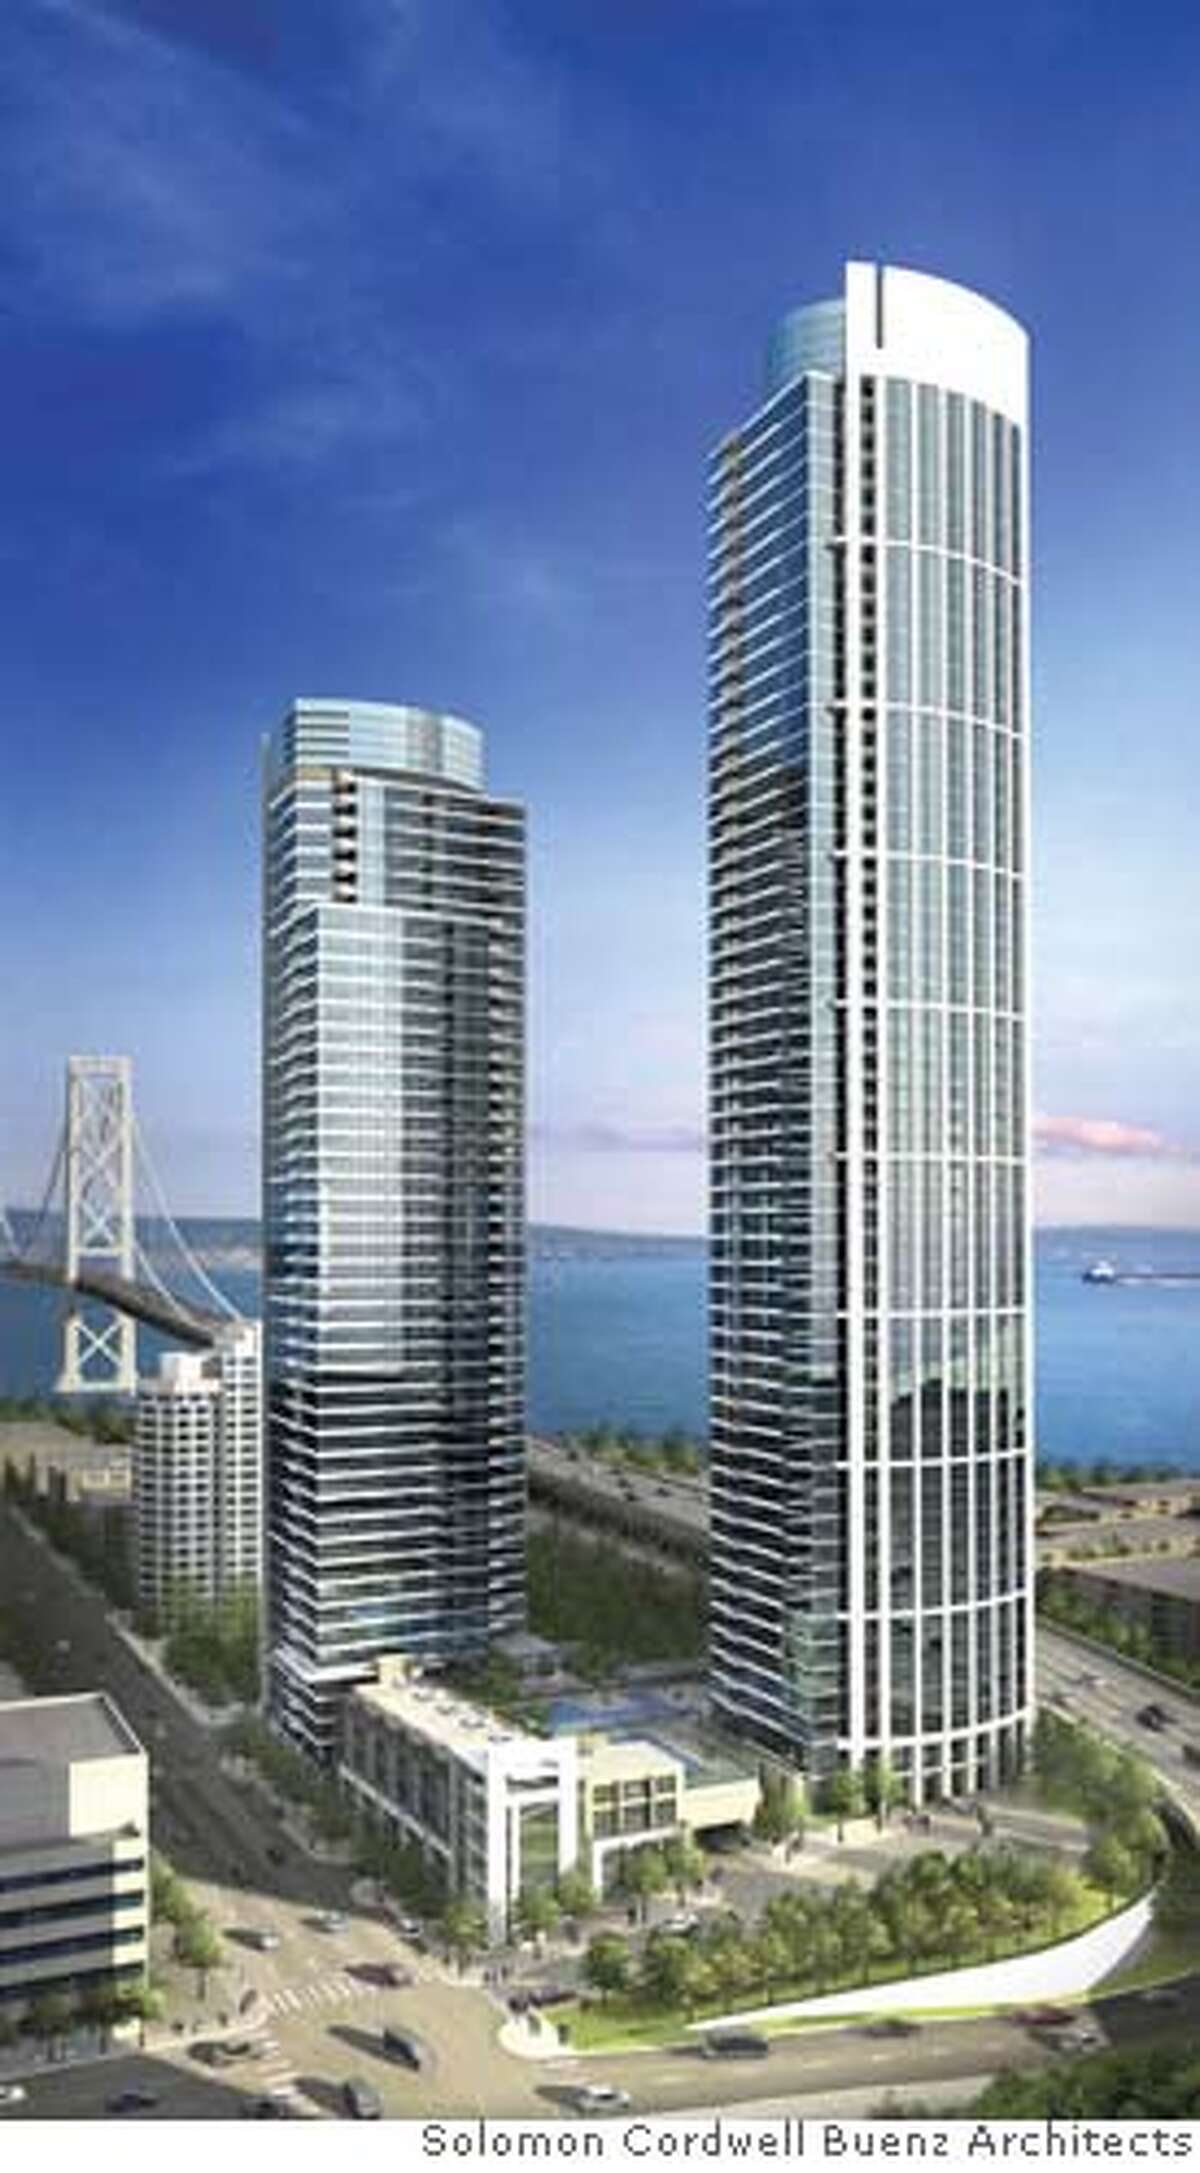 Artist's rendering of the two condominium towers at One Rincon Hill. The taller of the towers, now under construction, will be 641 feet high - 267 feet taller than the nearby tower of the Bay Bridge. The smaller tower will be 541 feet high. Credit: Solomon Cordwell Buenz architects (no commas SBC) Ran on: 06-14-2006 The two towers are shown in artists rendering; the taller will be higher than Bay Bridge tower. Ran on: 06-14-2006 Ran on: 06-14-2006 Ran on: 06-15-2006 Ran on: 06-26-2006 The new city: Artists rendering of two condominium towers on Rincon Hill.